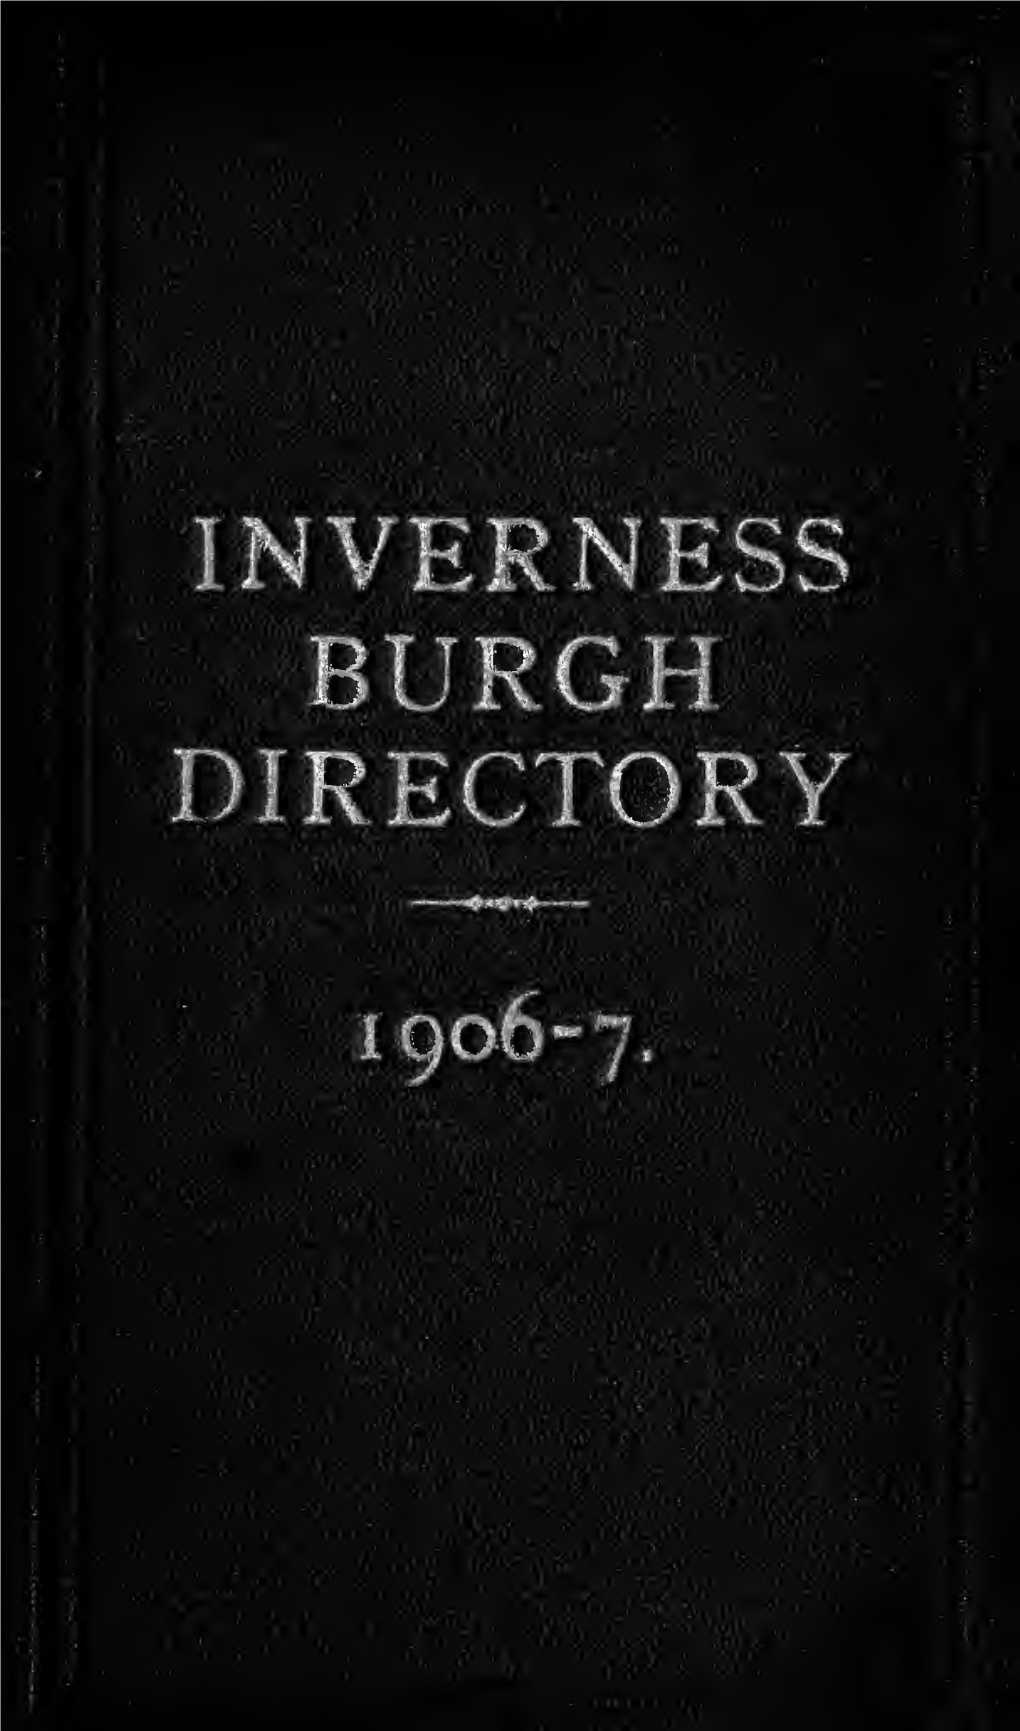 Inverness Burgh Directory for 1906-1907 Containing Street, Trade, & Alphabetical Directory Plan of the Town and Official and Professional List